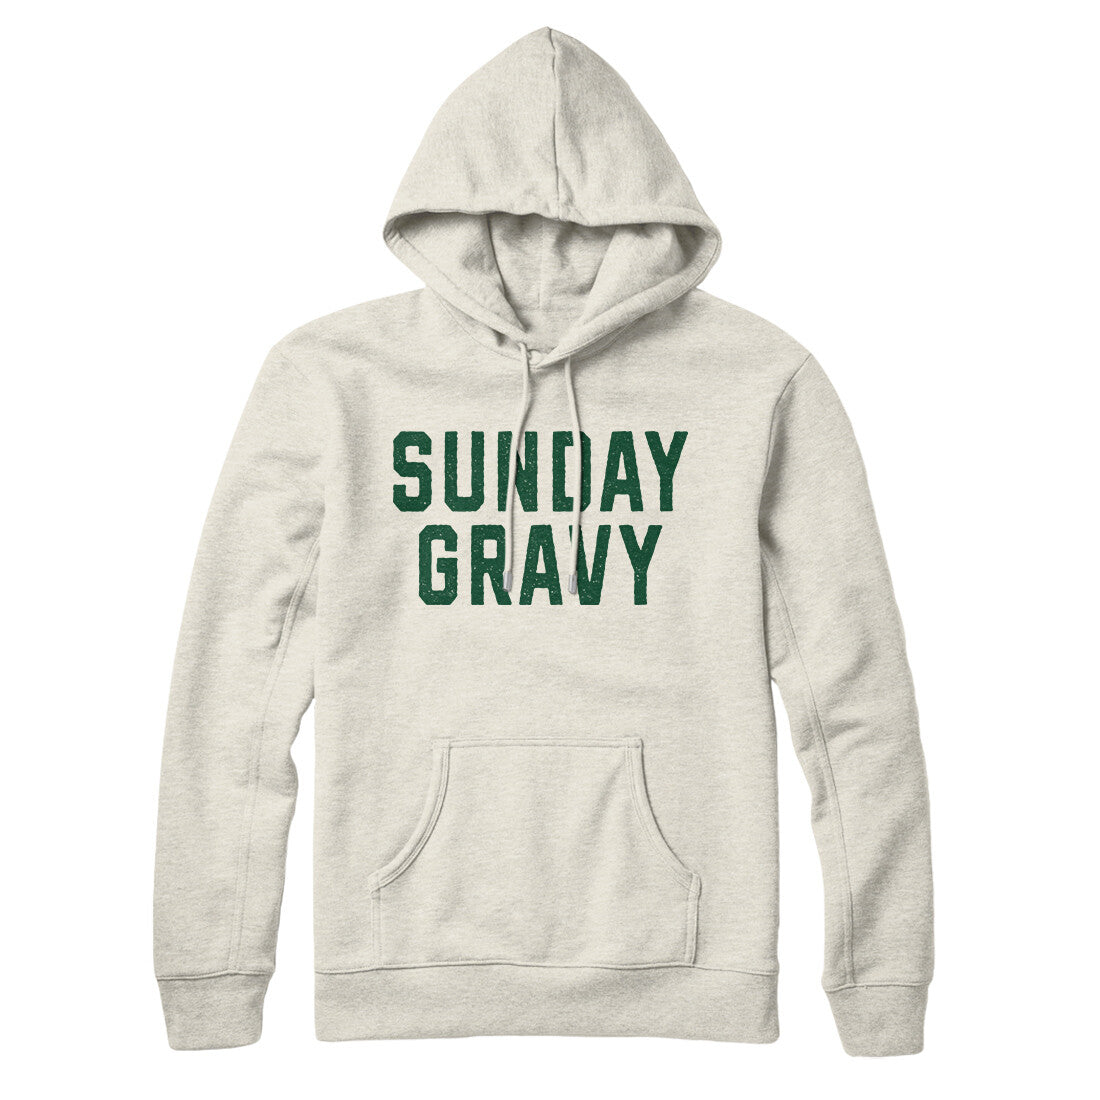 Sunday Gravy in Heather Oatmeal Color